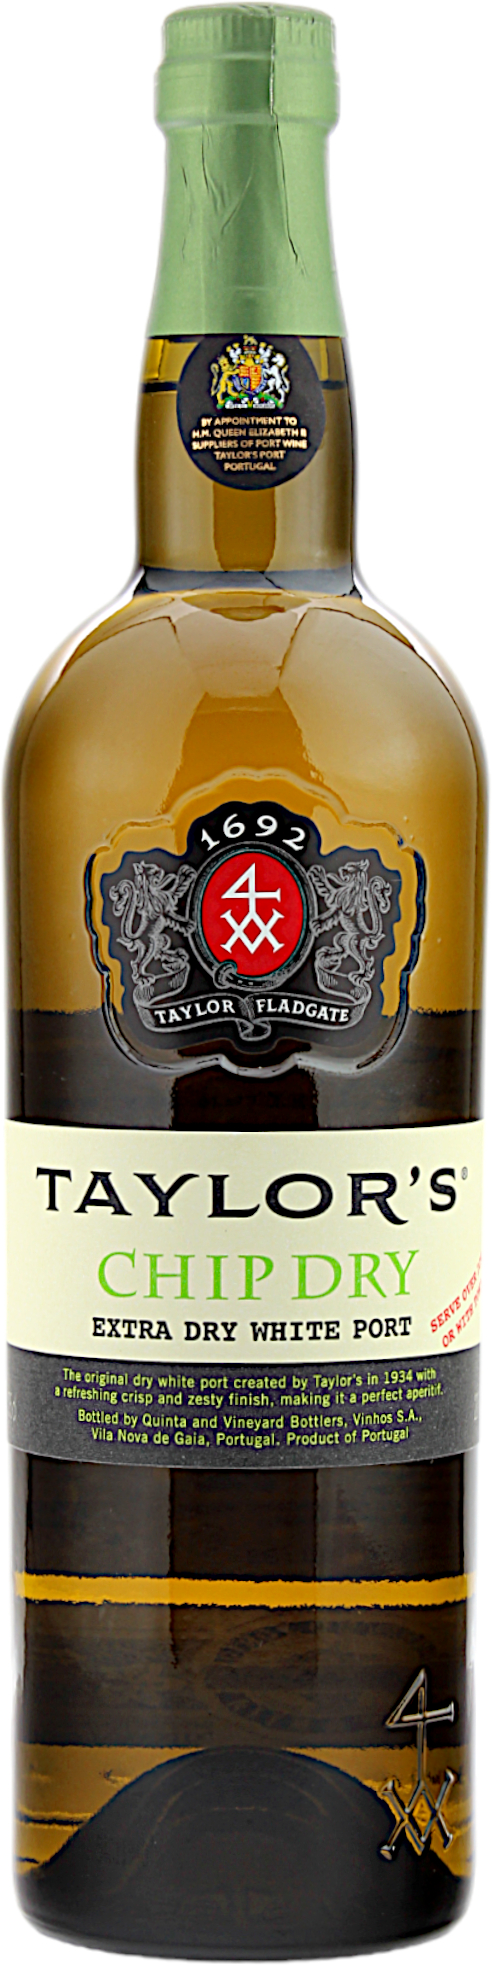 Taylor's Chip Dry Extra Dry White Port 20.0% 0,75l